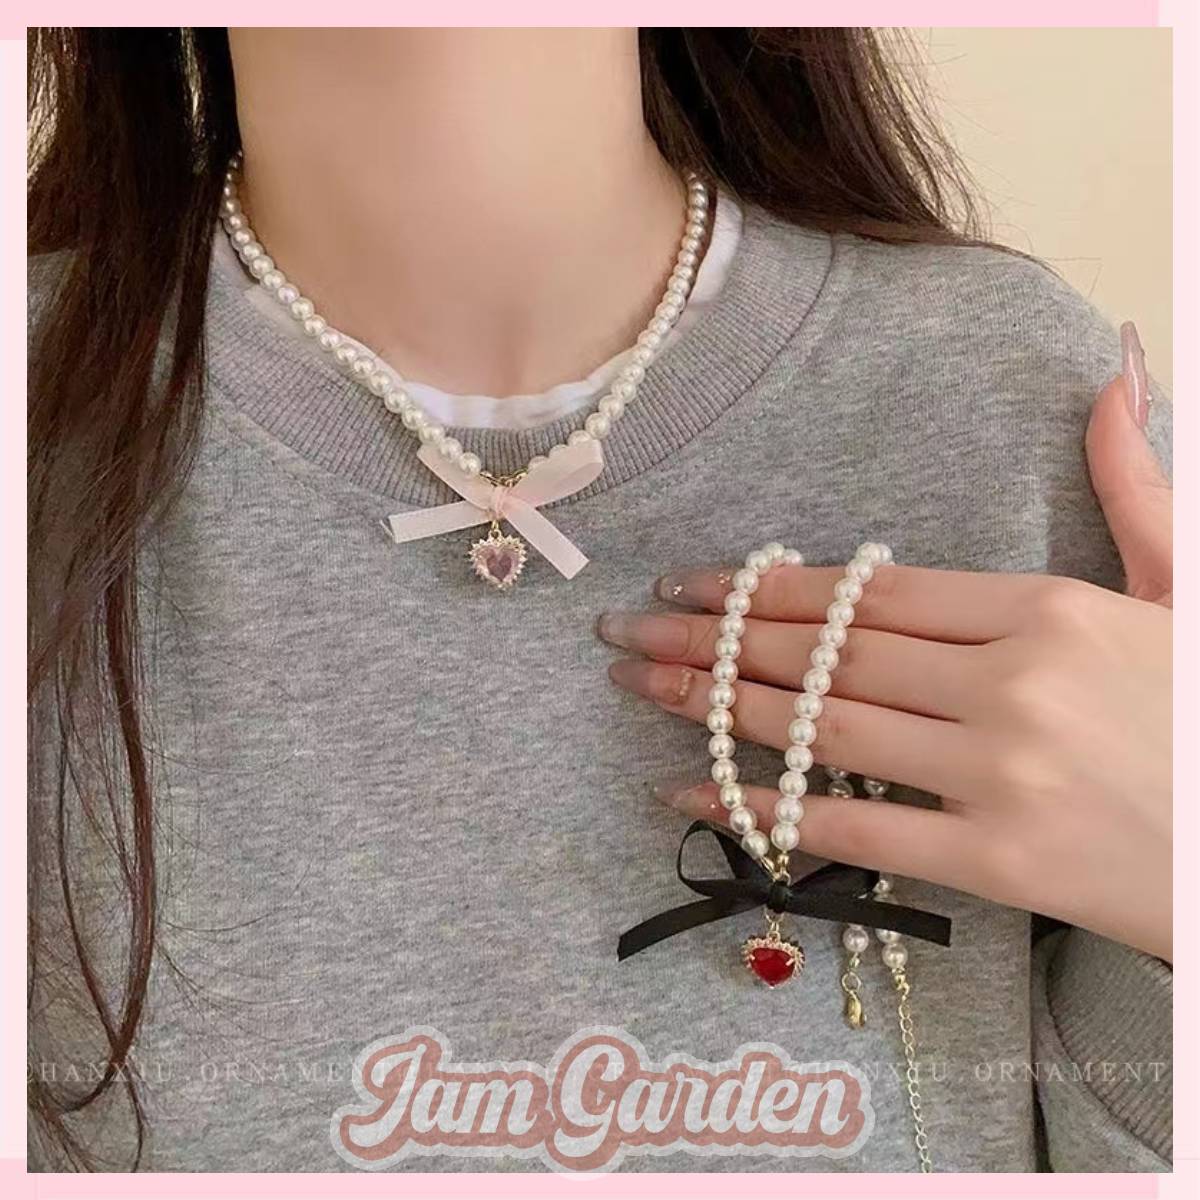 Sweet Pearl Heart Ribbon Necklace